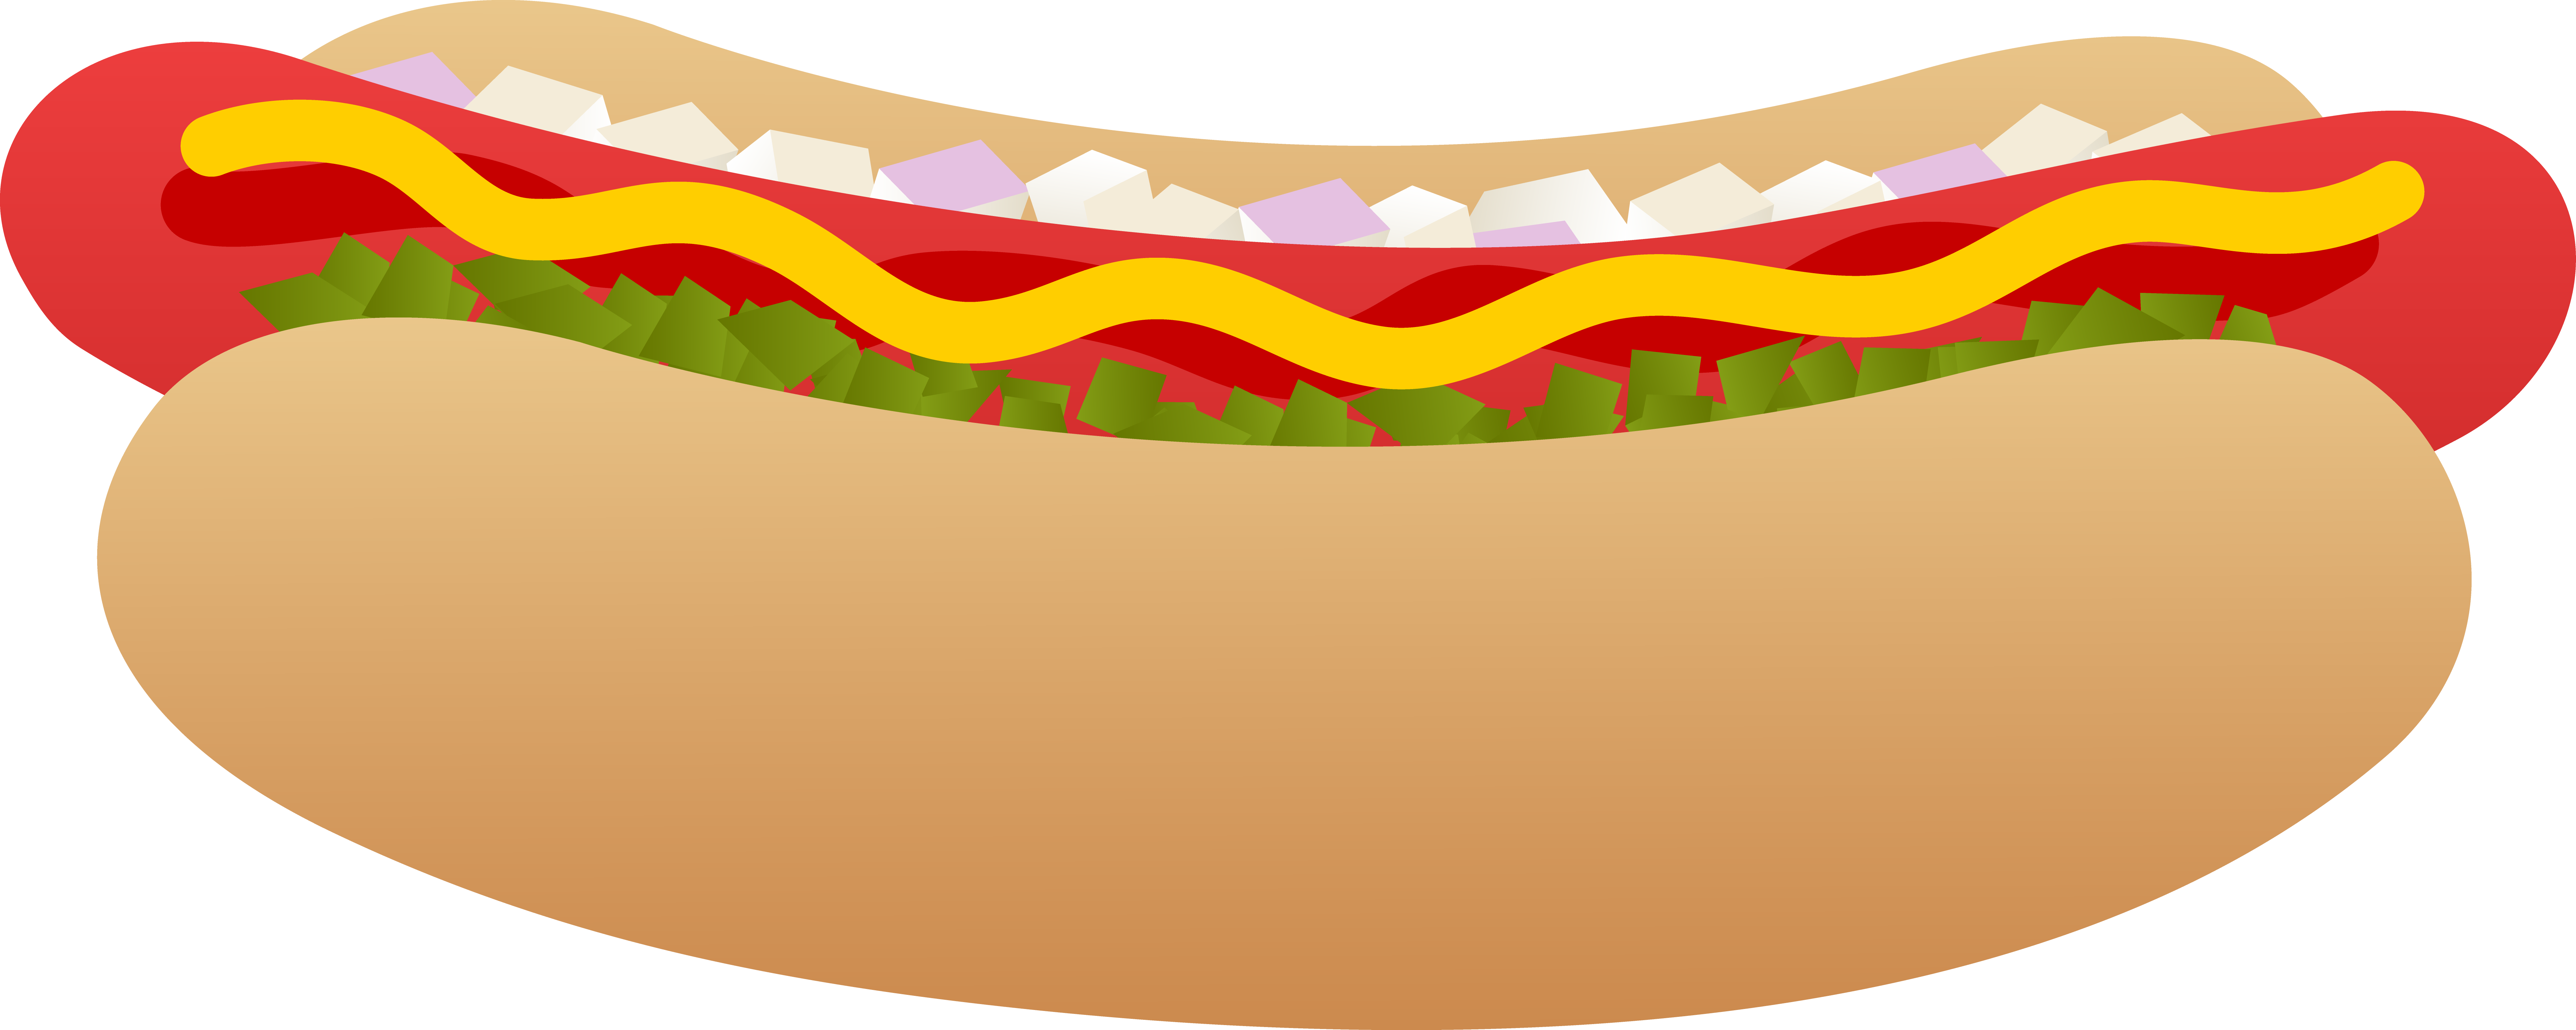 Animated Hot Dog - ClipArt Best